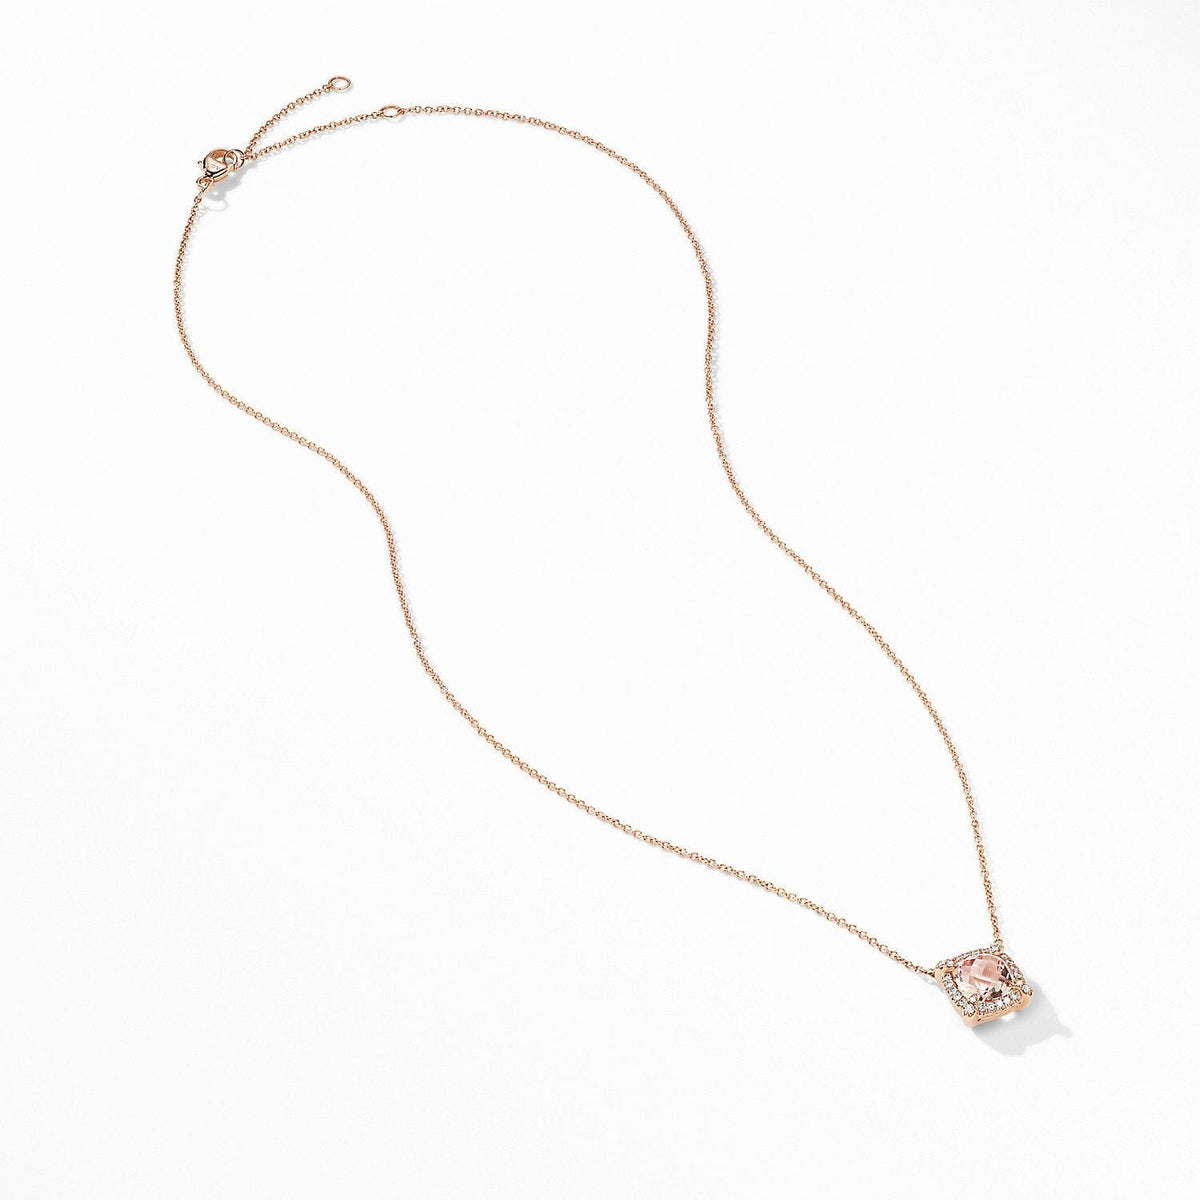 Petite Chatelaine® Pavé Bezel Pendant Necklace in 18K Rose Gold with Morganite